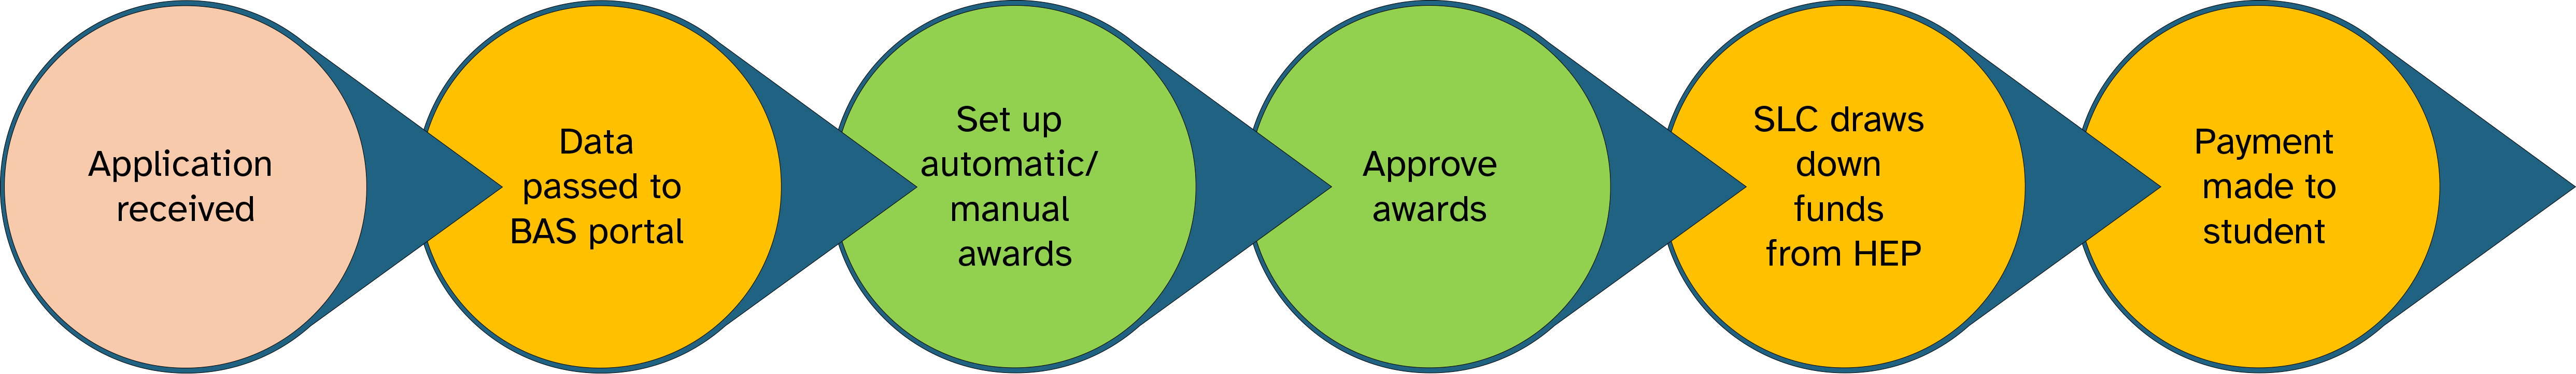 A process flow chart for the Bursaries Administration Service. Step 1, an application is received. Step 2, Application data is passed to the BAS portal. Step 3, set up is completed for automatic or manual awards. Step 4, Awards are approved. Step 5, Student Loans Company will draw down funds from the Higher Education Provider. Step 6, Payment of the bursary is made to the student.